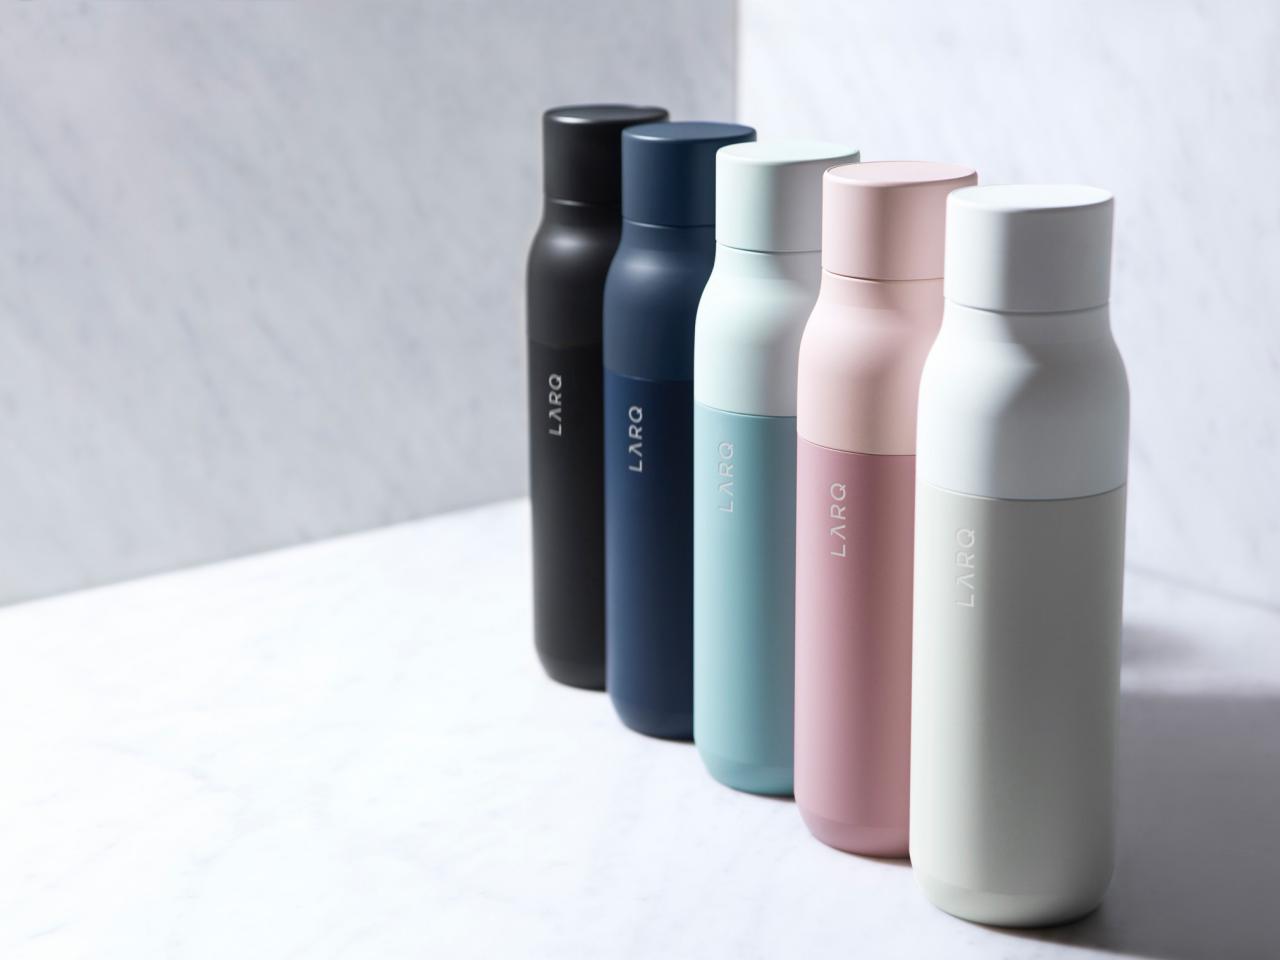 LARQ Review 2019: Self-Cleaning Water Bottle - Suburban Tourist